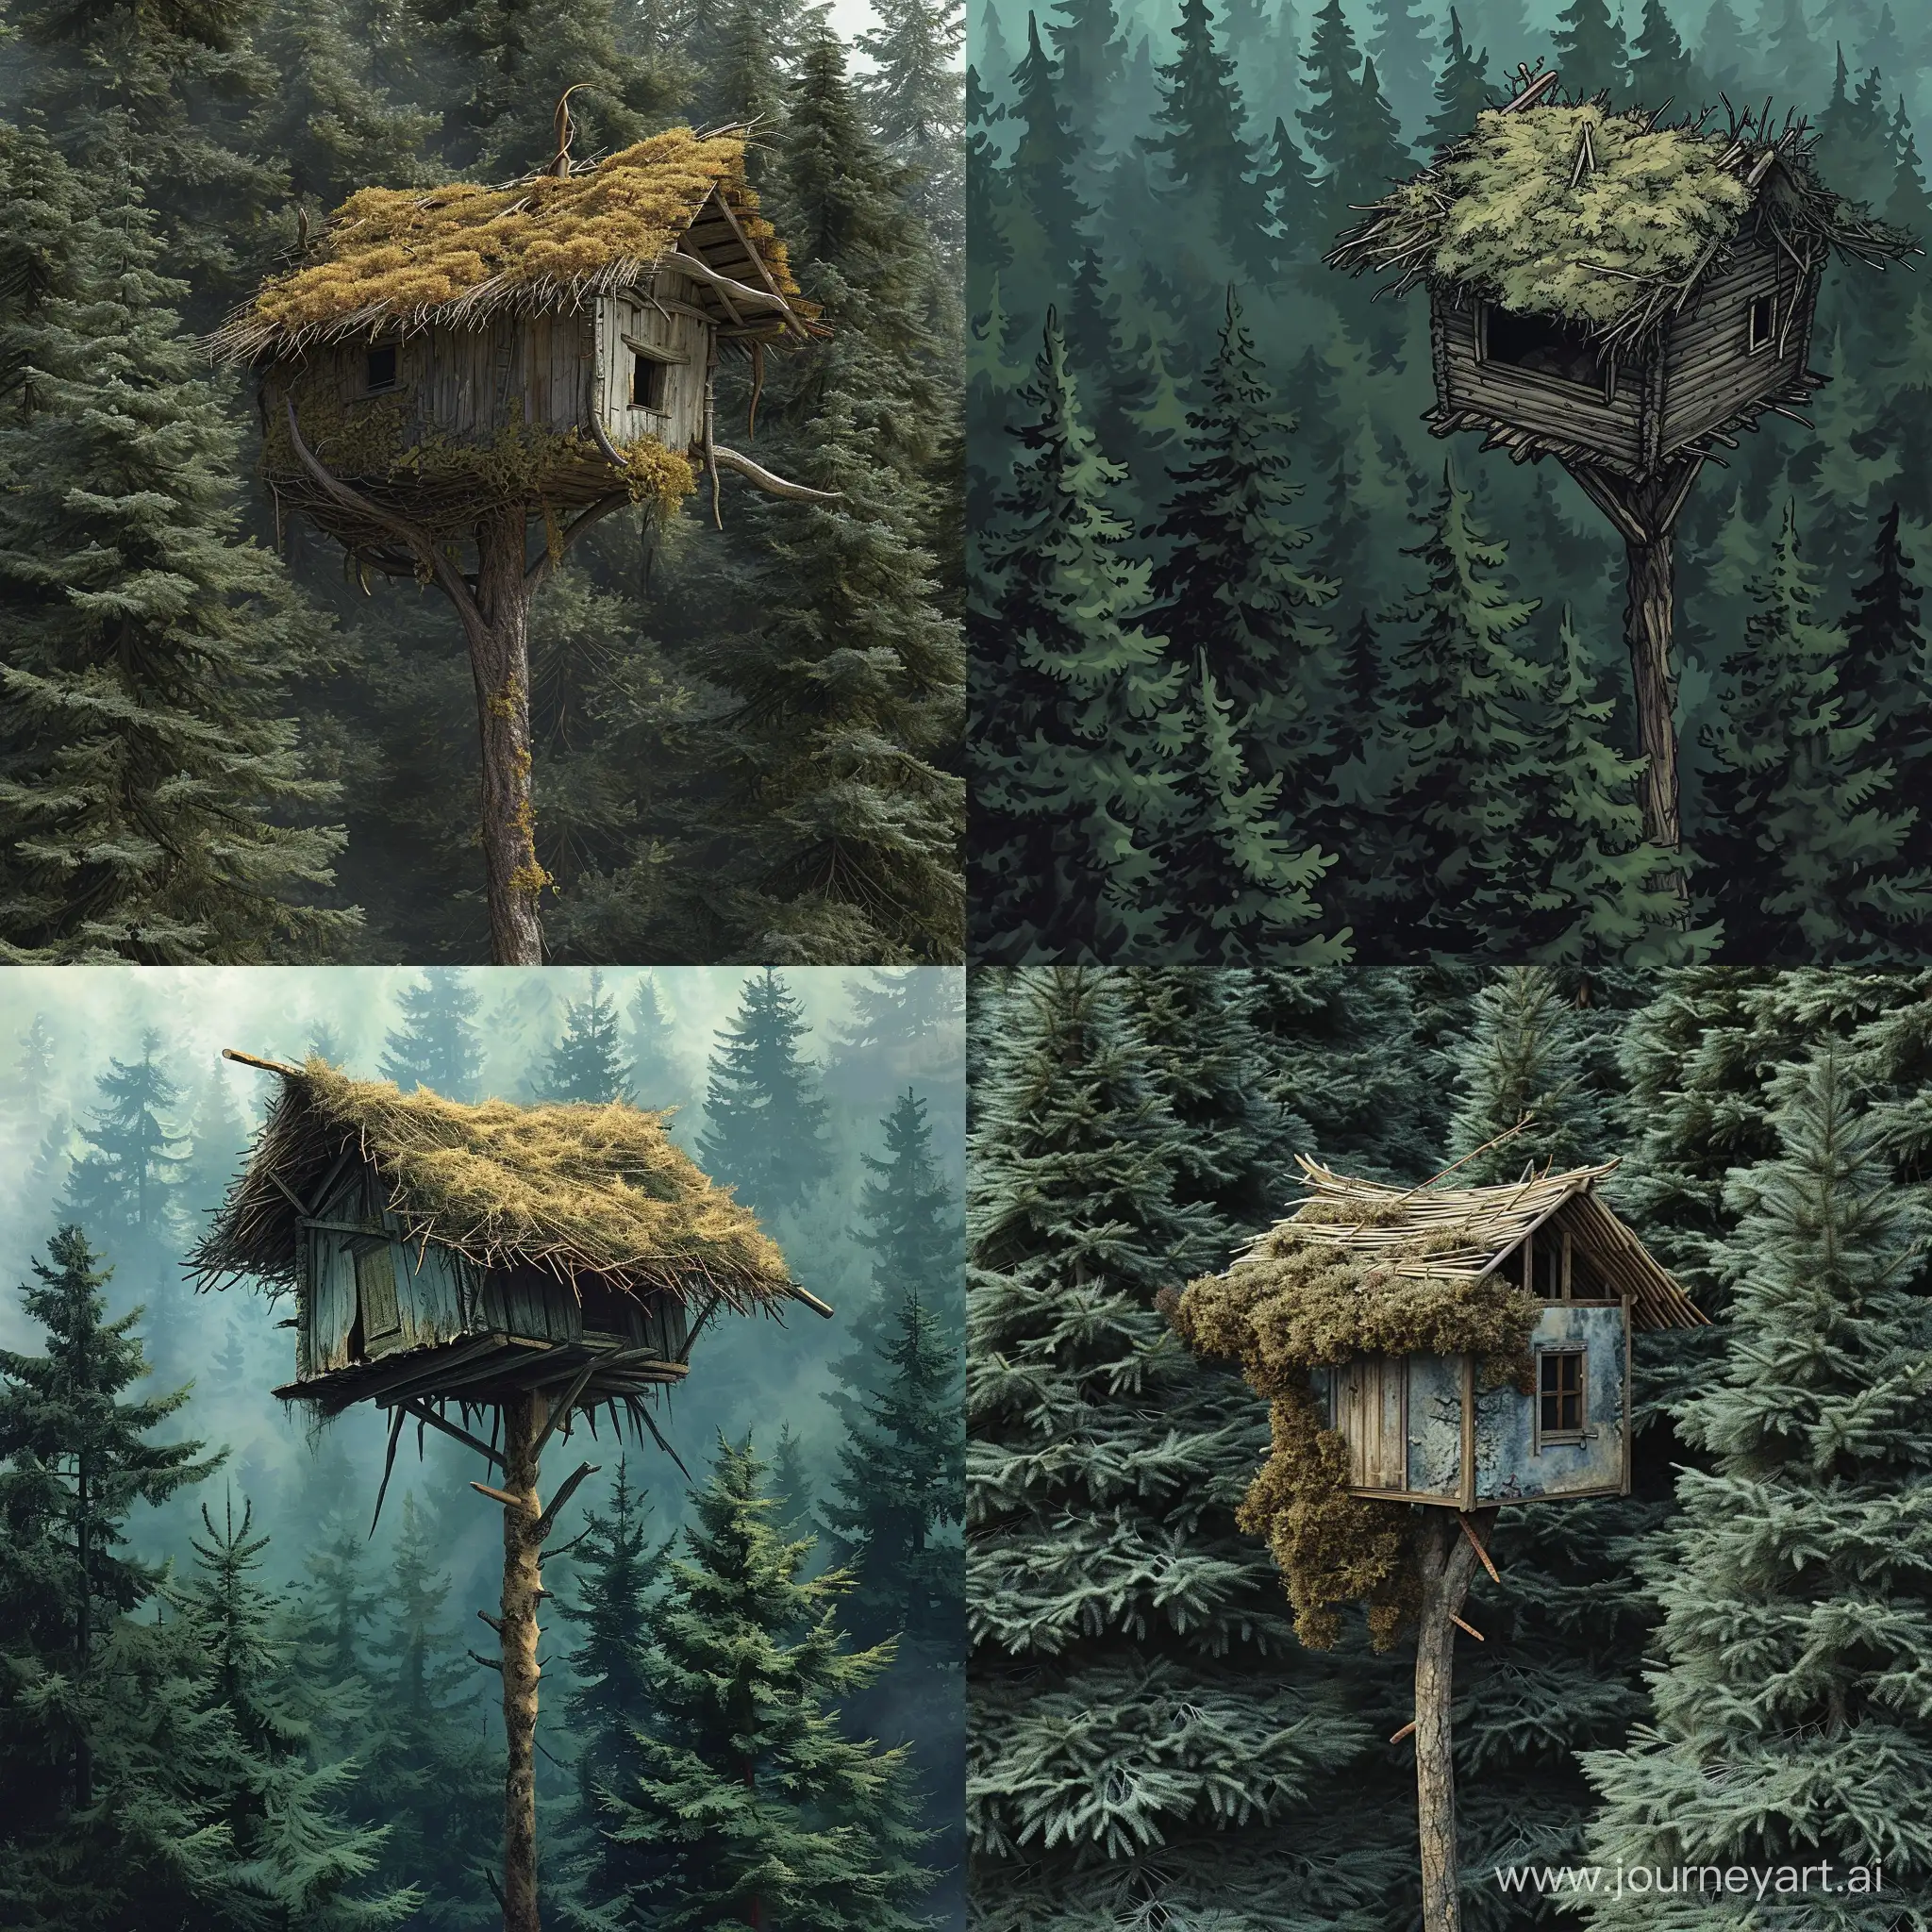 Quaint-TwigRoofed-Hut-Amidst-Spruce-Trees-in-Caricature-Style